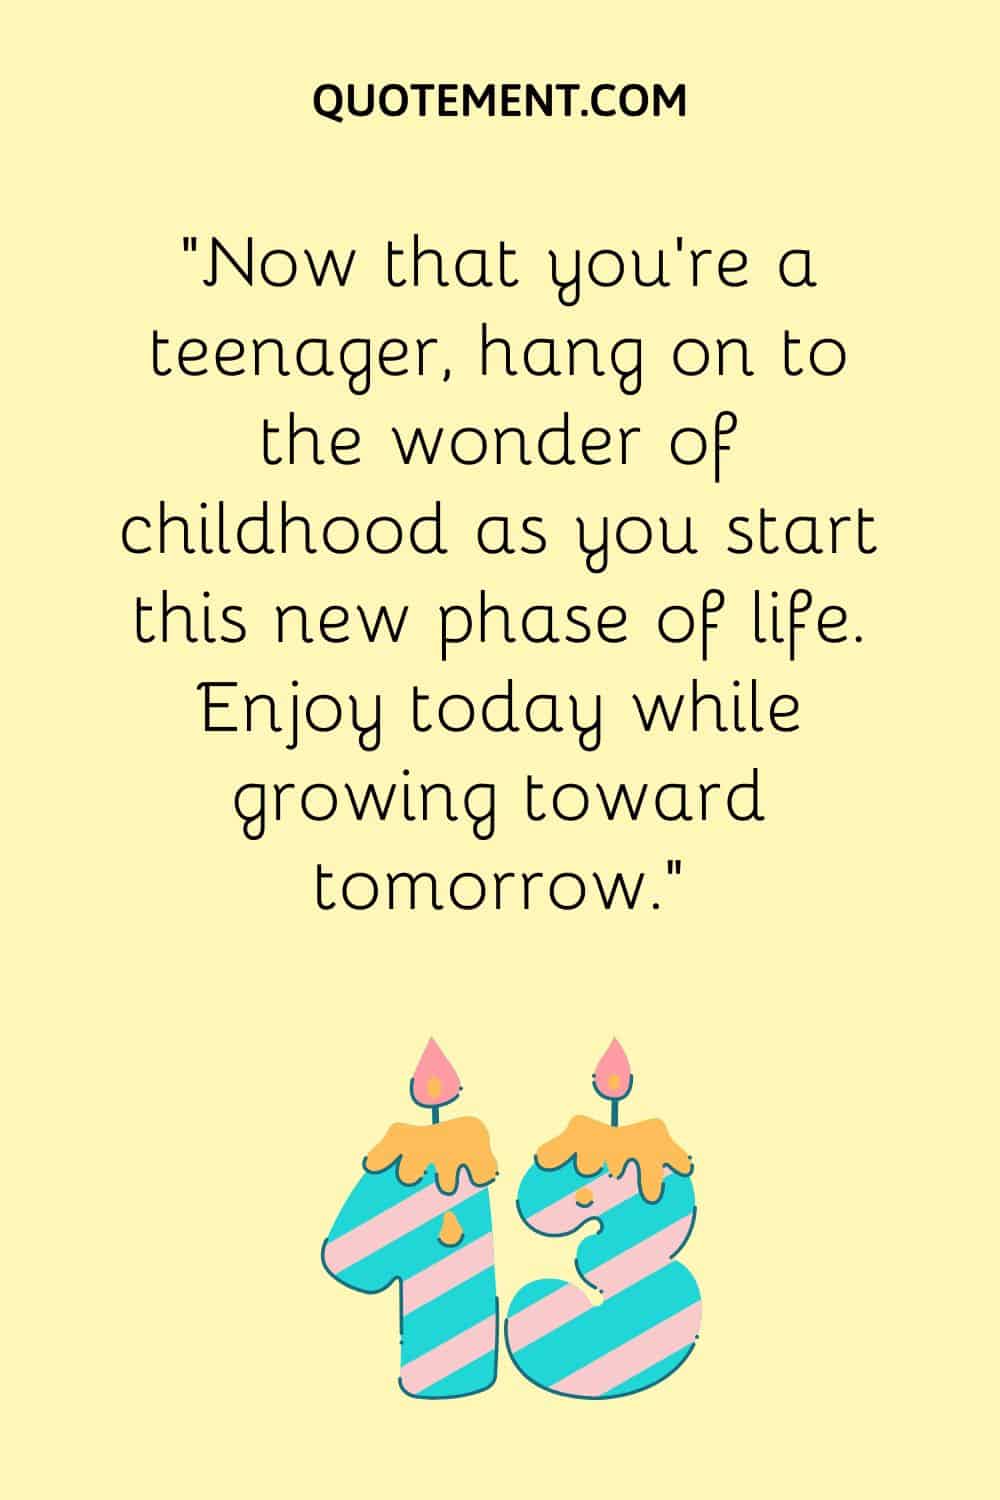 Now that you're a teenager, hang on to the wonder of childhood as you start this new phase of life